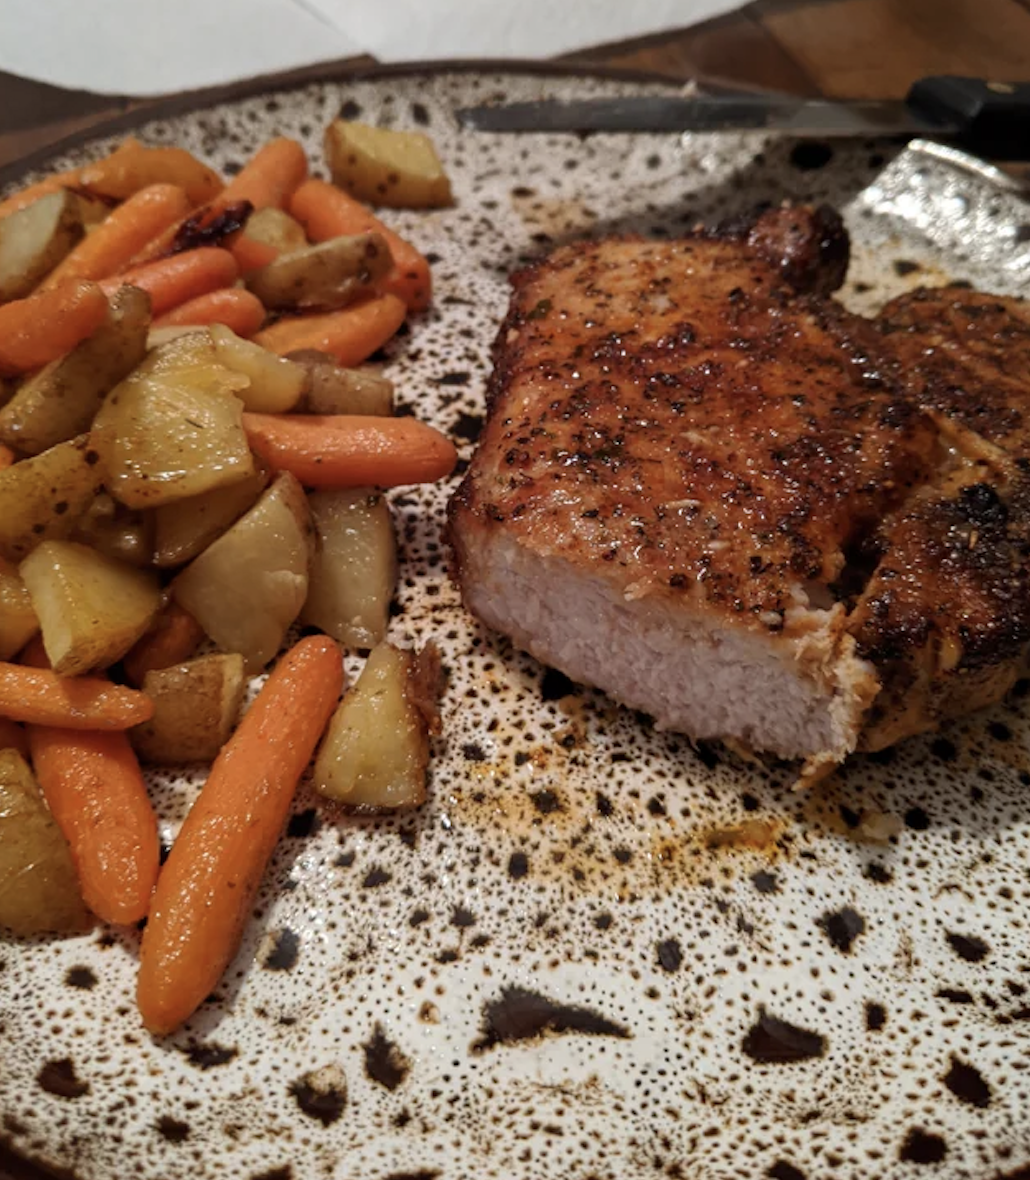 A pork chop with vegetables